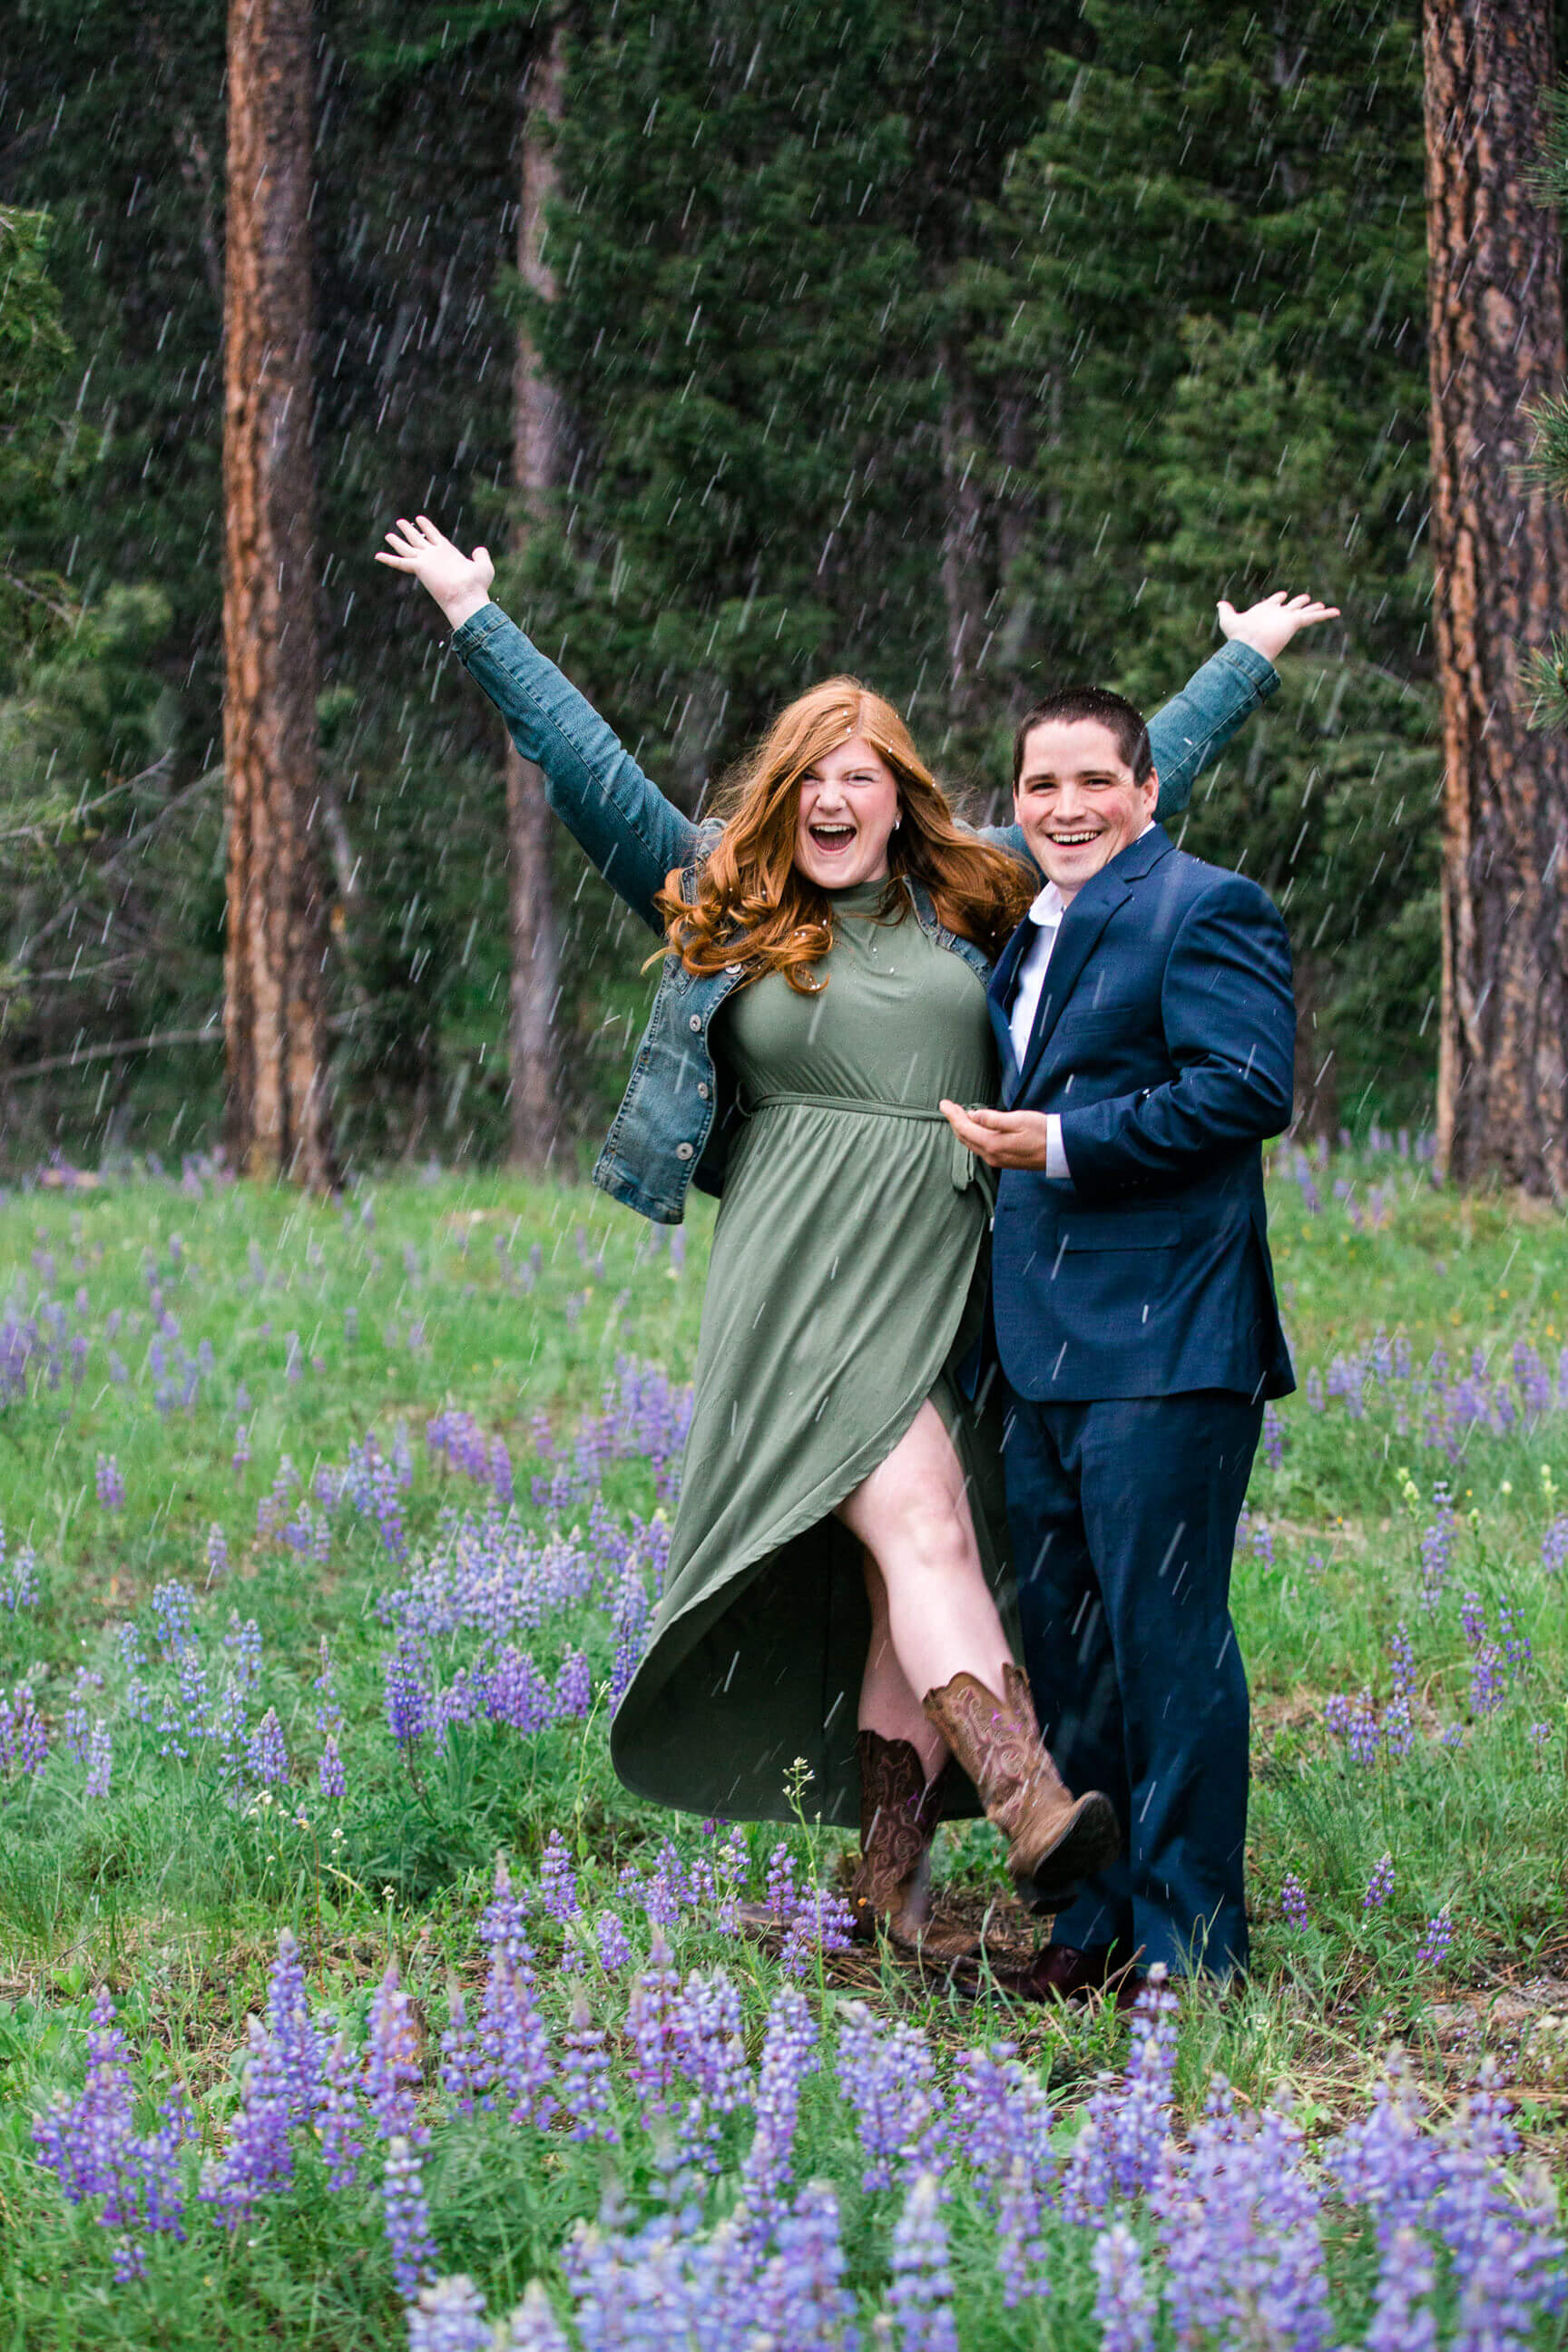 A husband and wife smile and laugh amidst a field of lupine wildflowers during a hail storm in Seeley Lake Montana